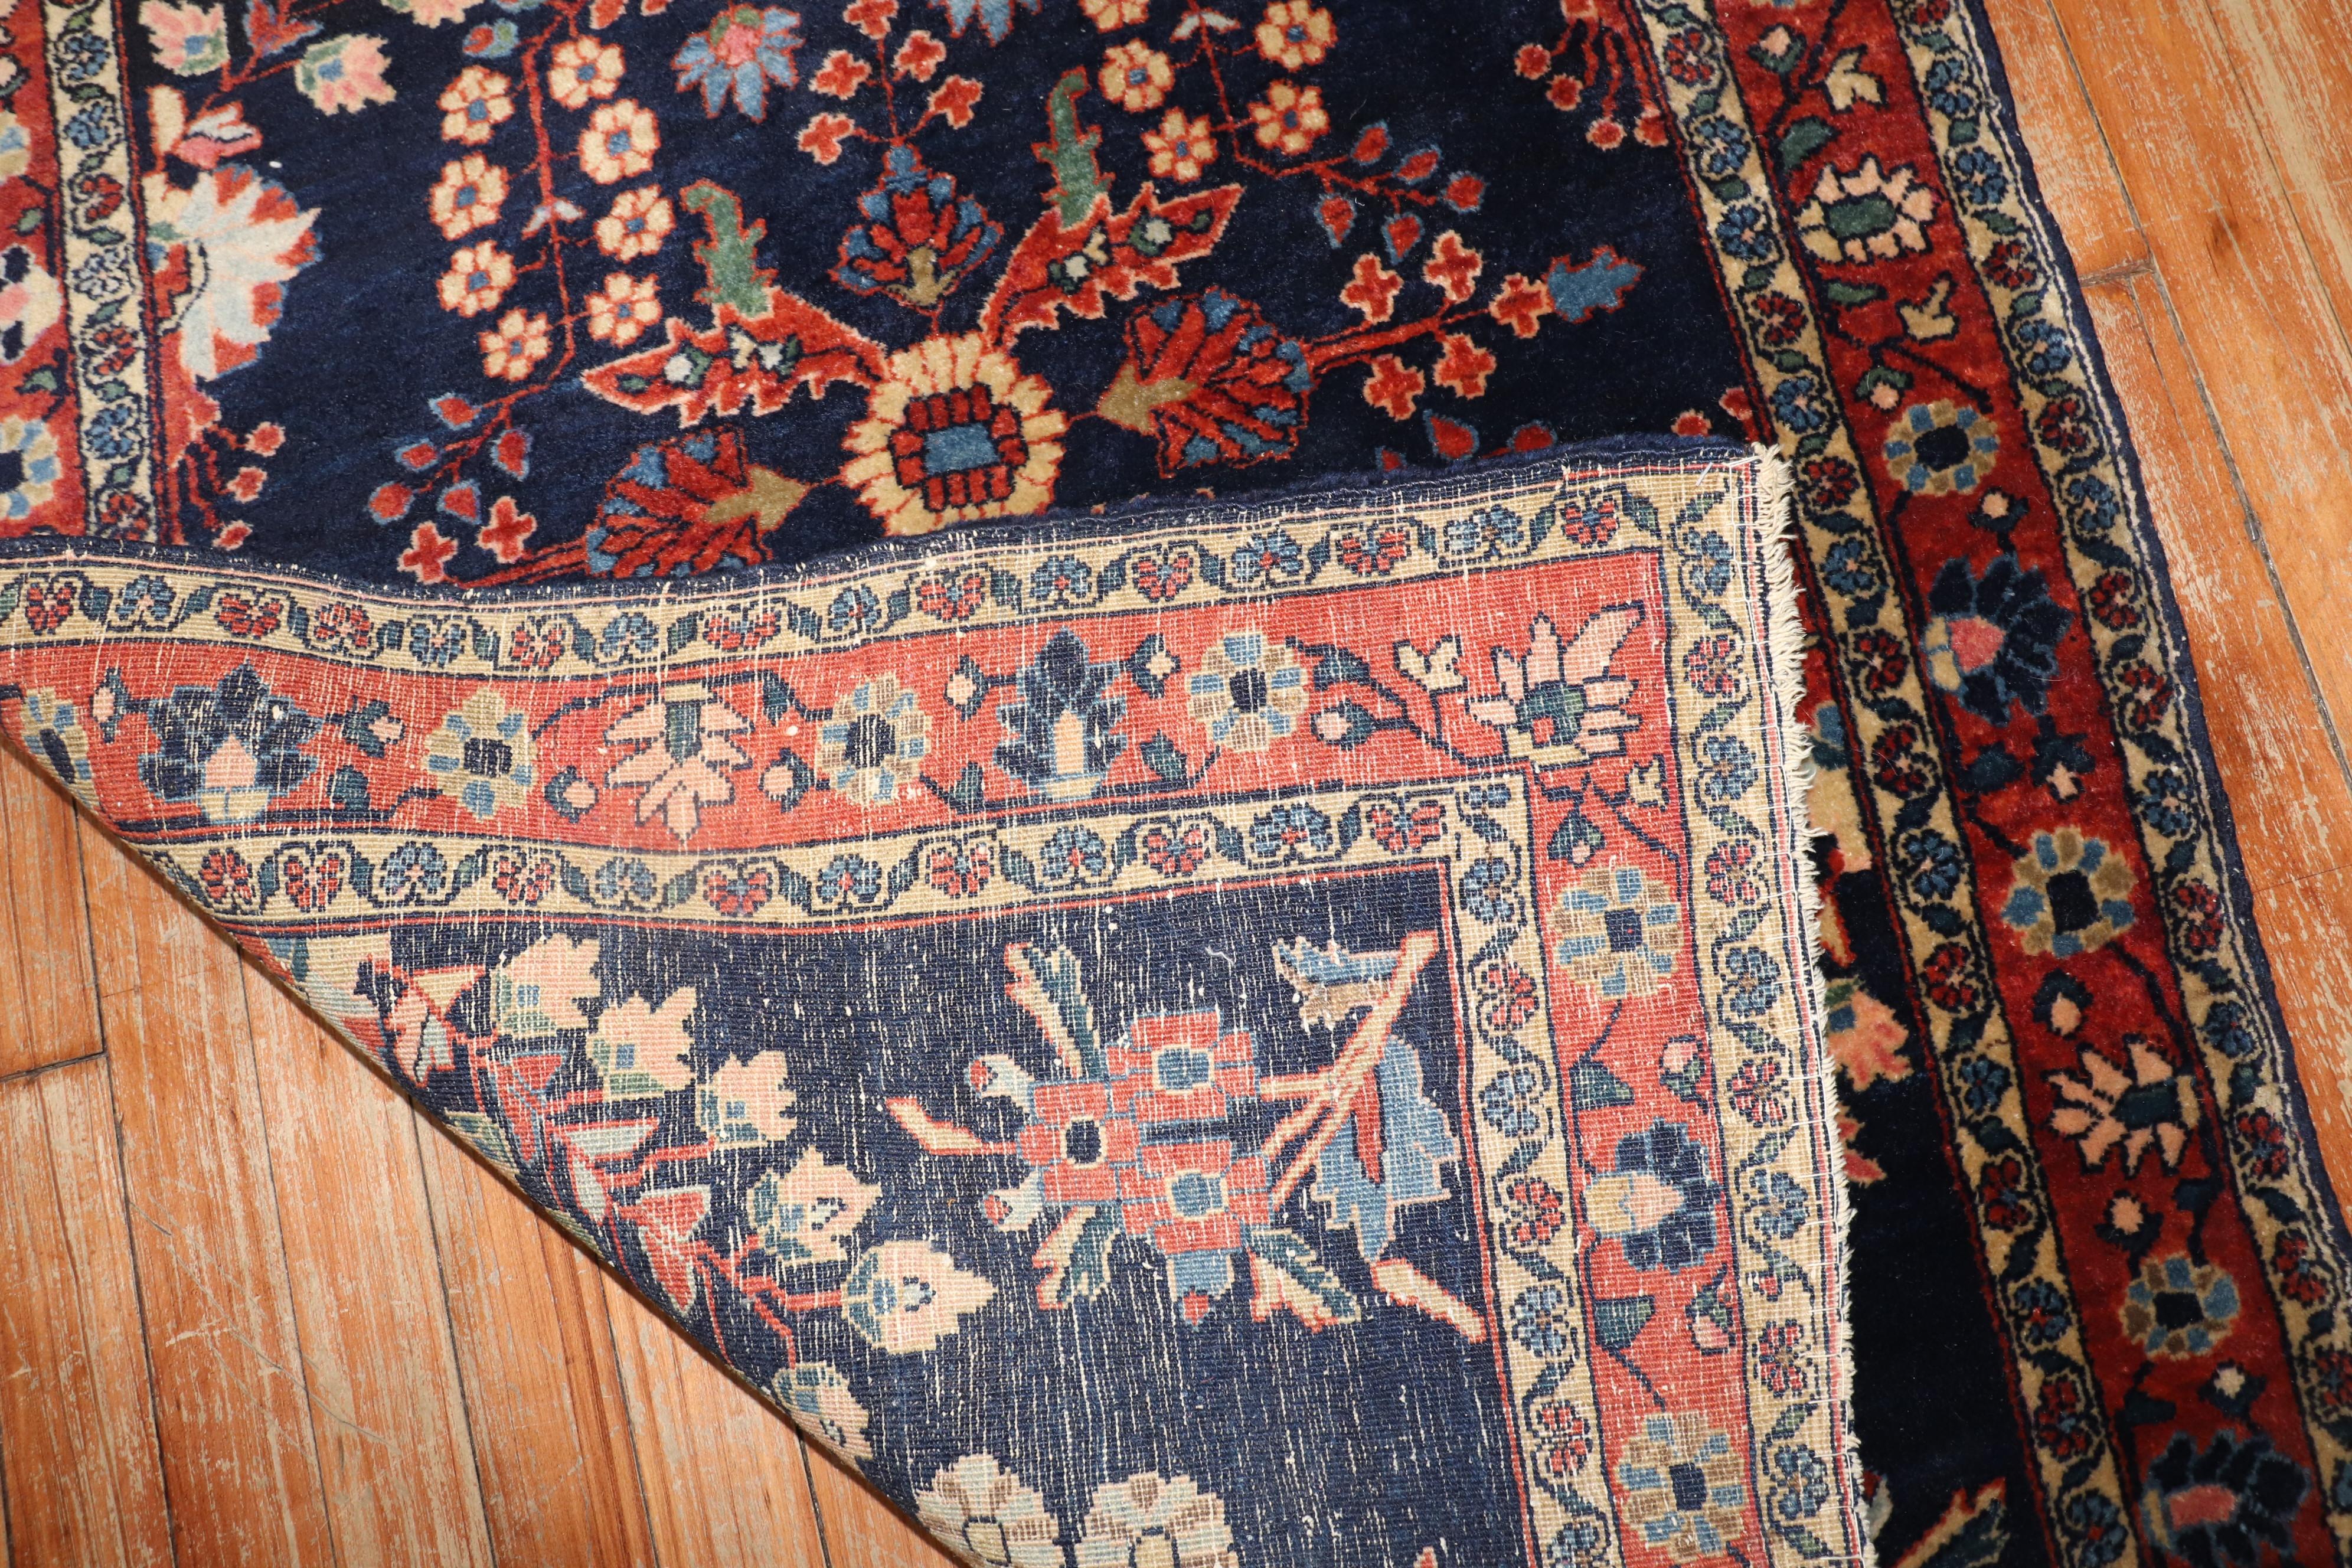 An authentic early 20th-century scatter size Persian Sarouk carpet with Classic medallion and border design on a crisp navy blue field, circa 1910.

Measures: 2'9